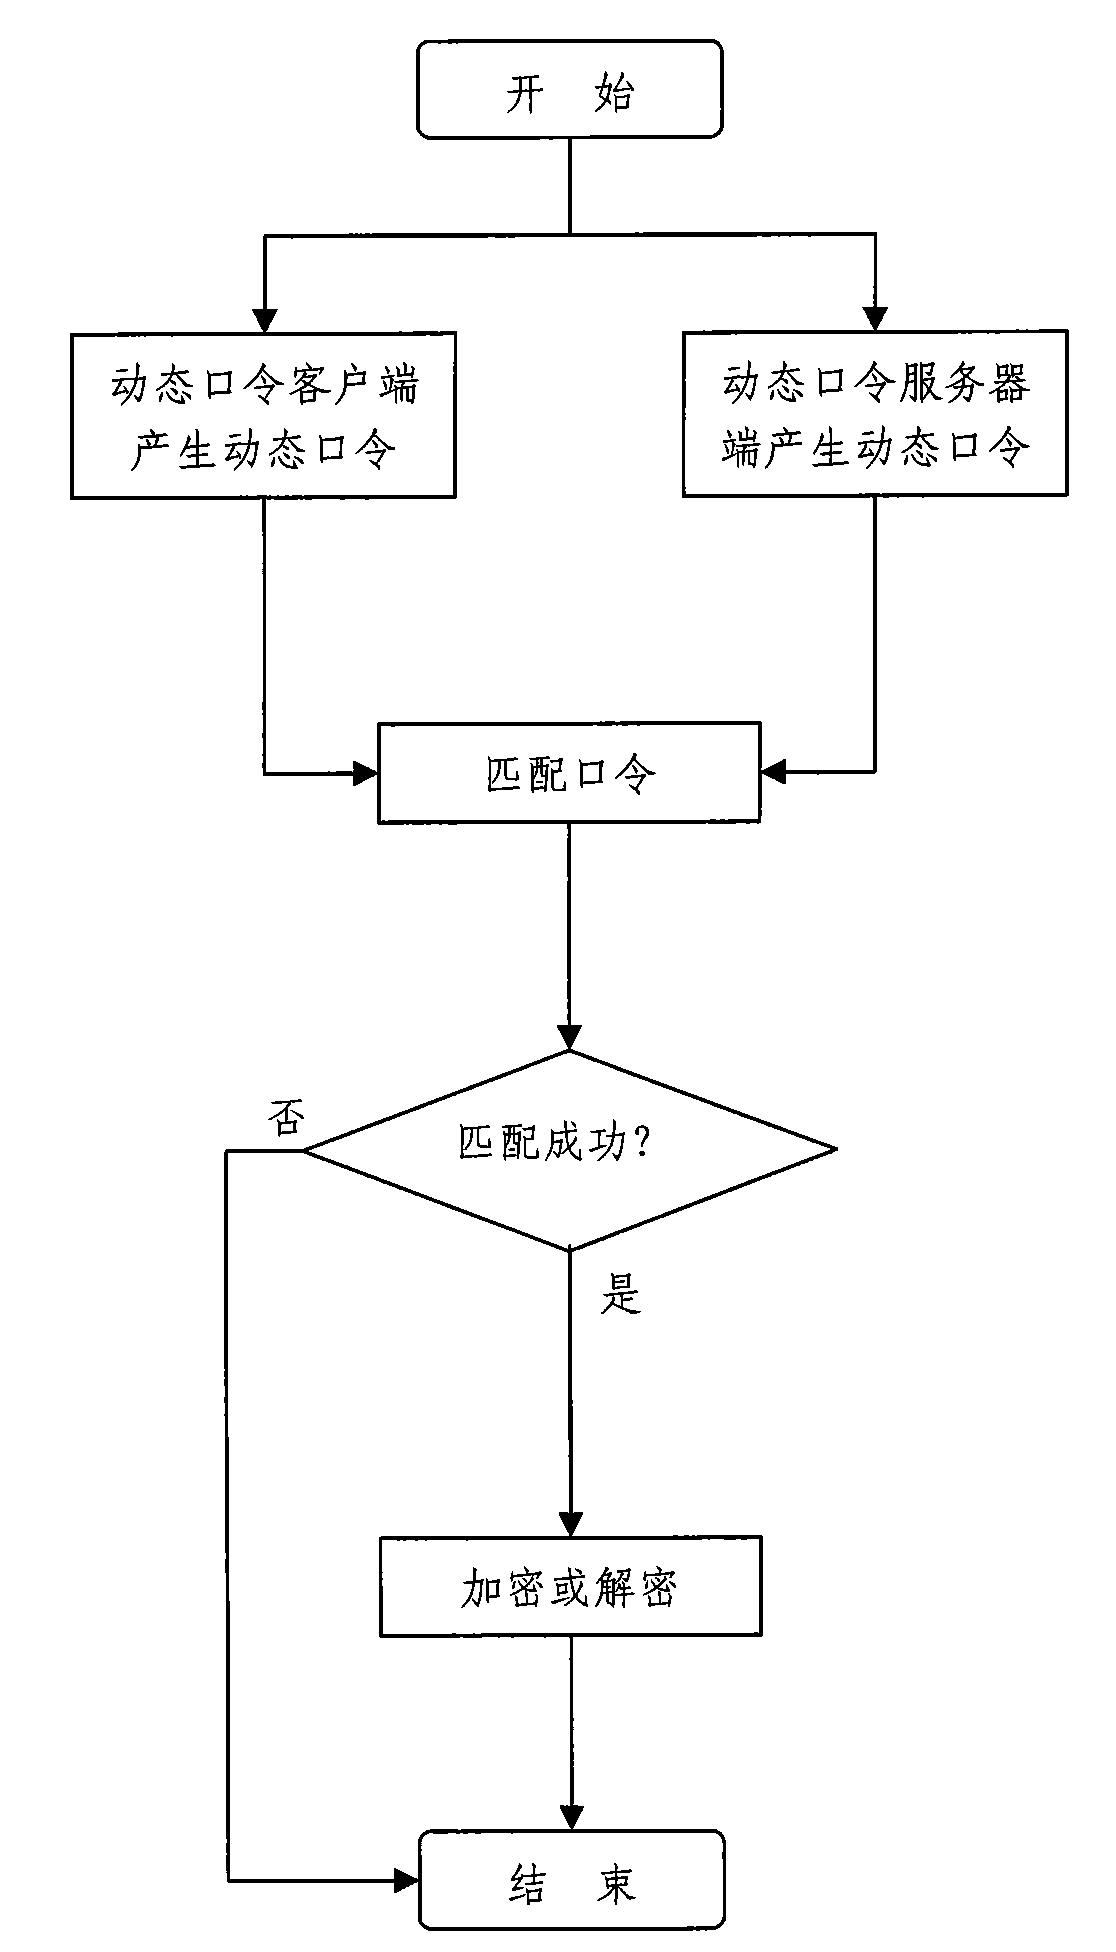 File and folder safety protection method based on dynamic password and system thereof